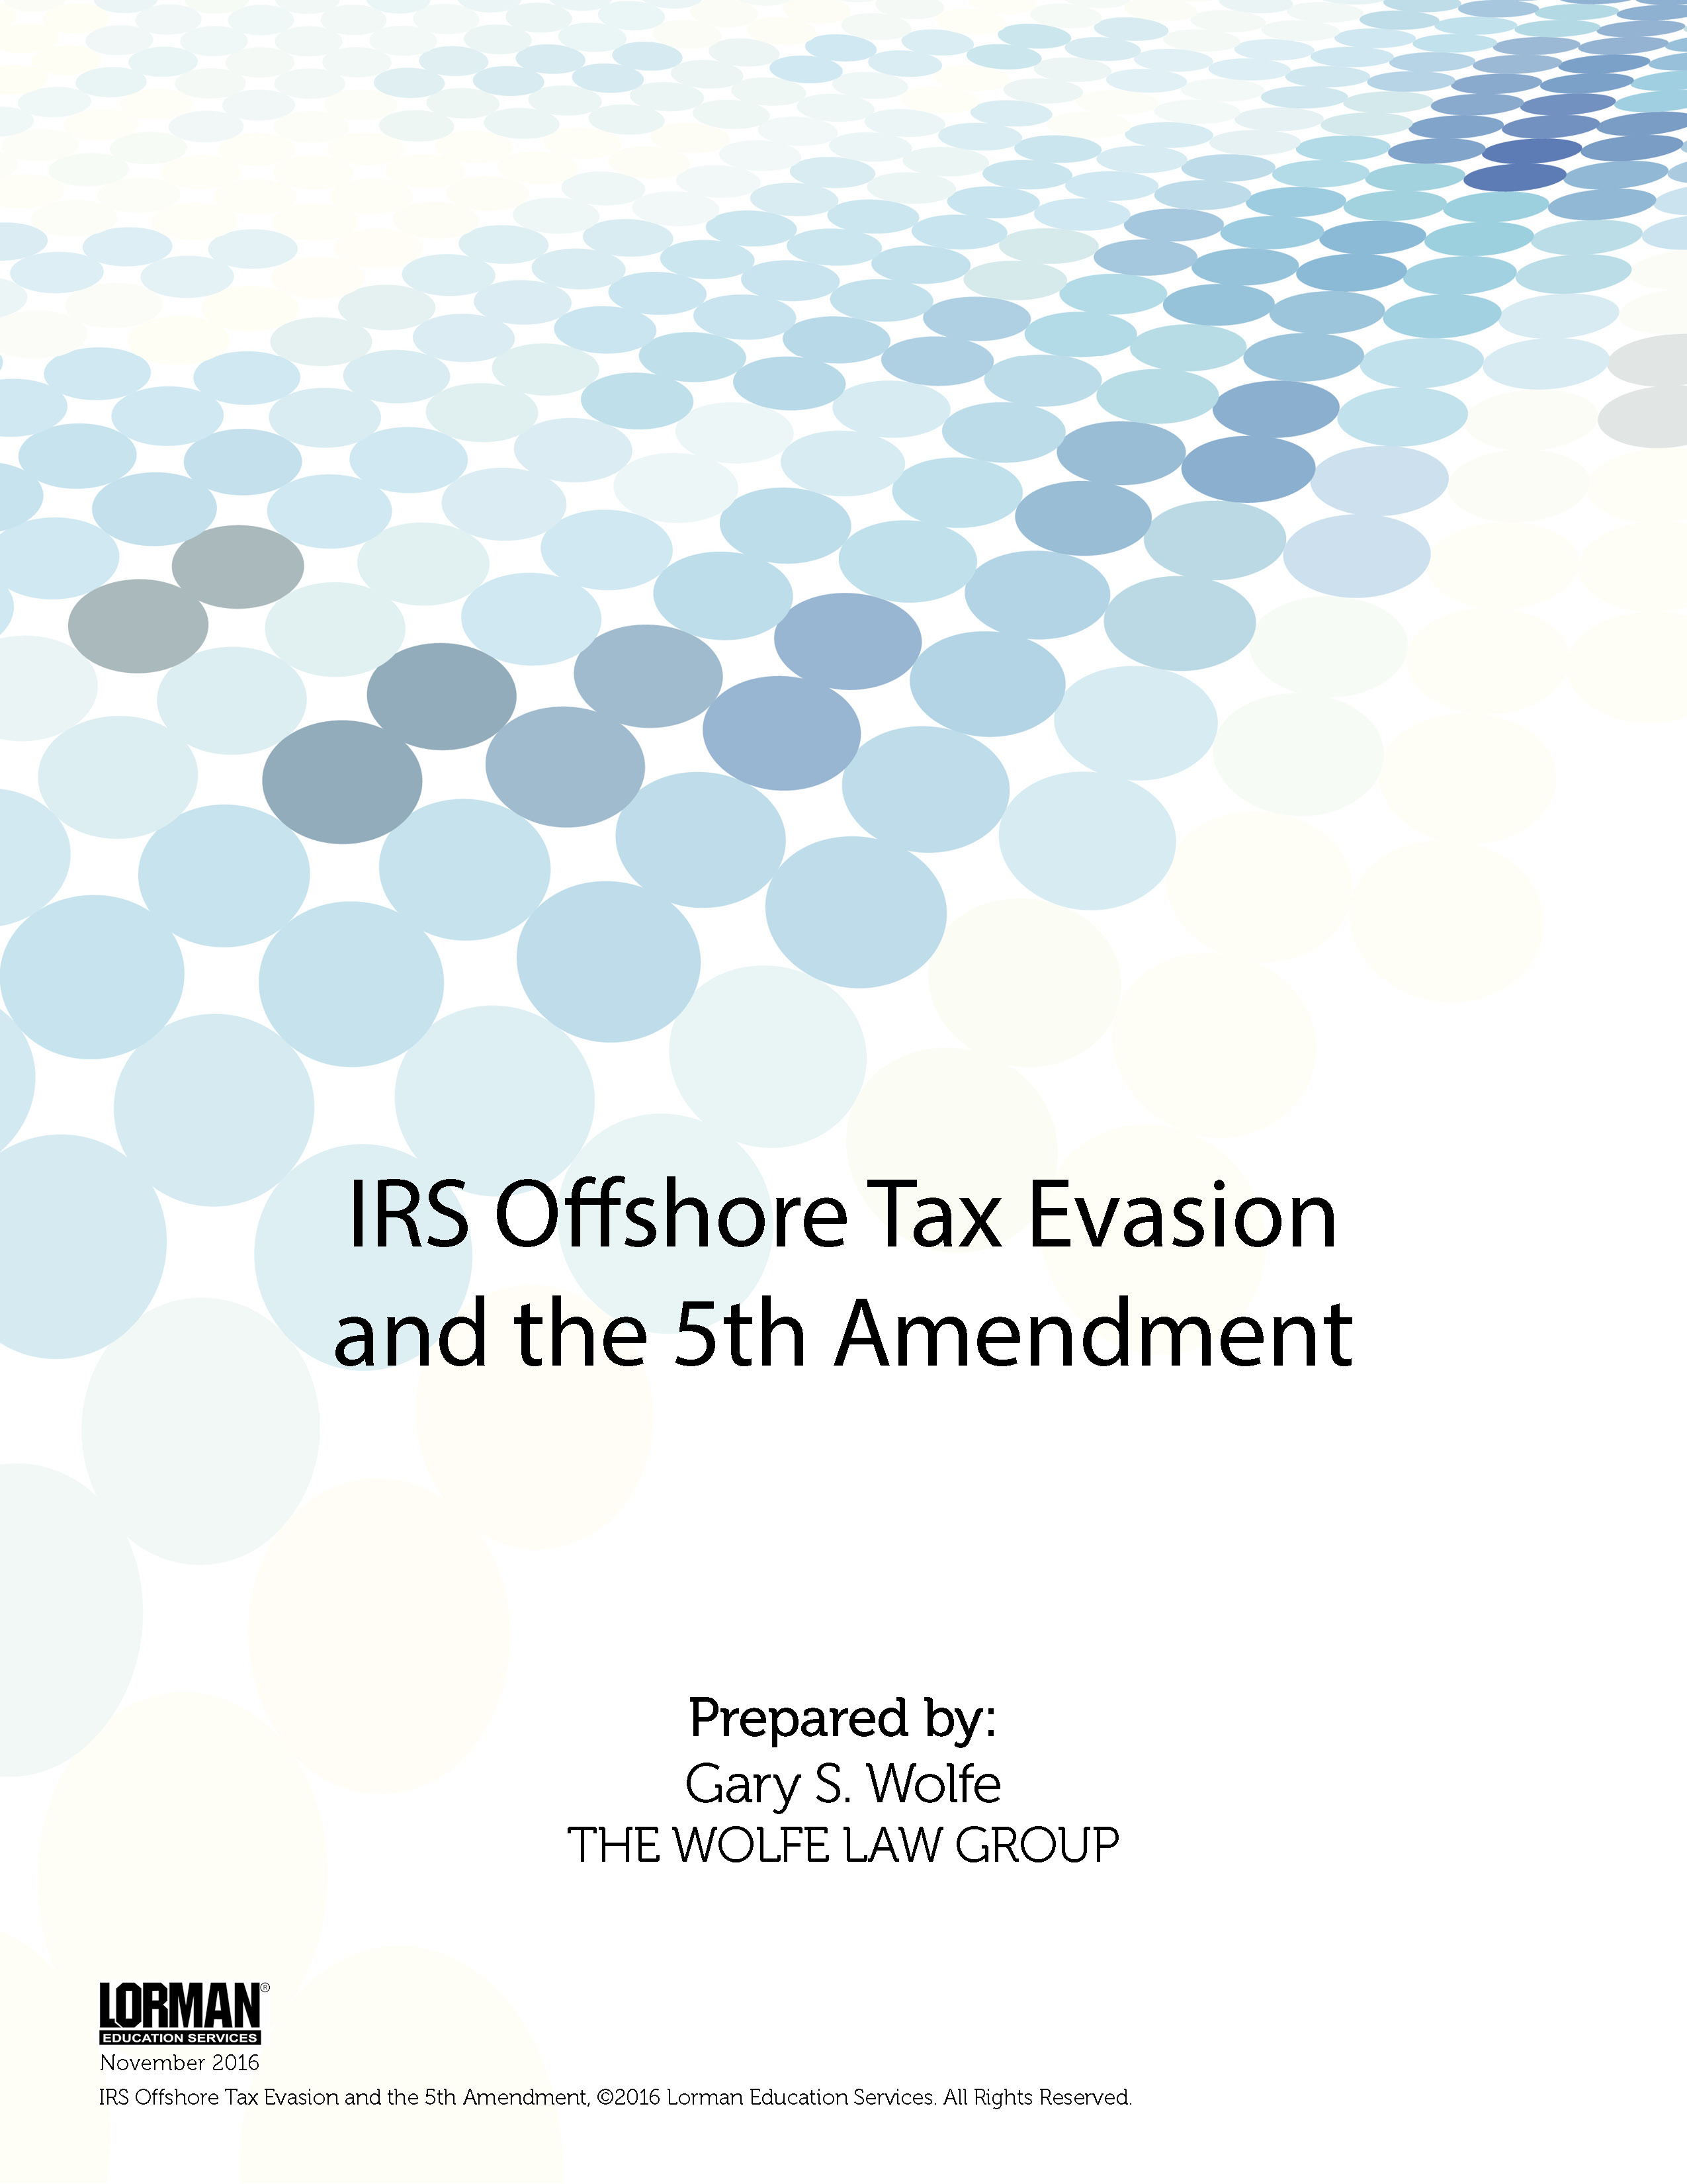 IRS Offshore Tax Evasion and the 5th Amendment